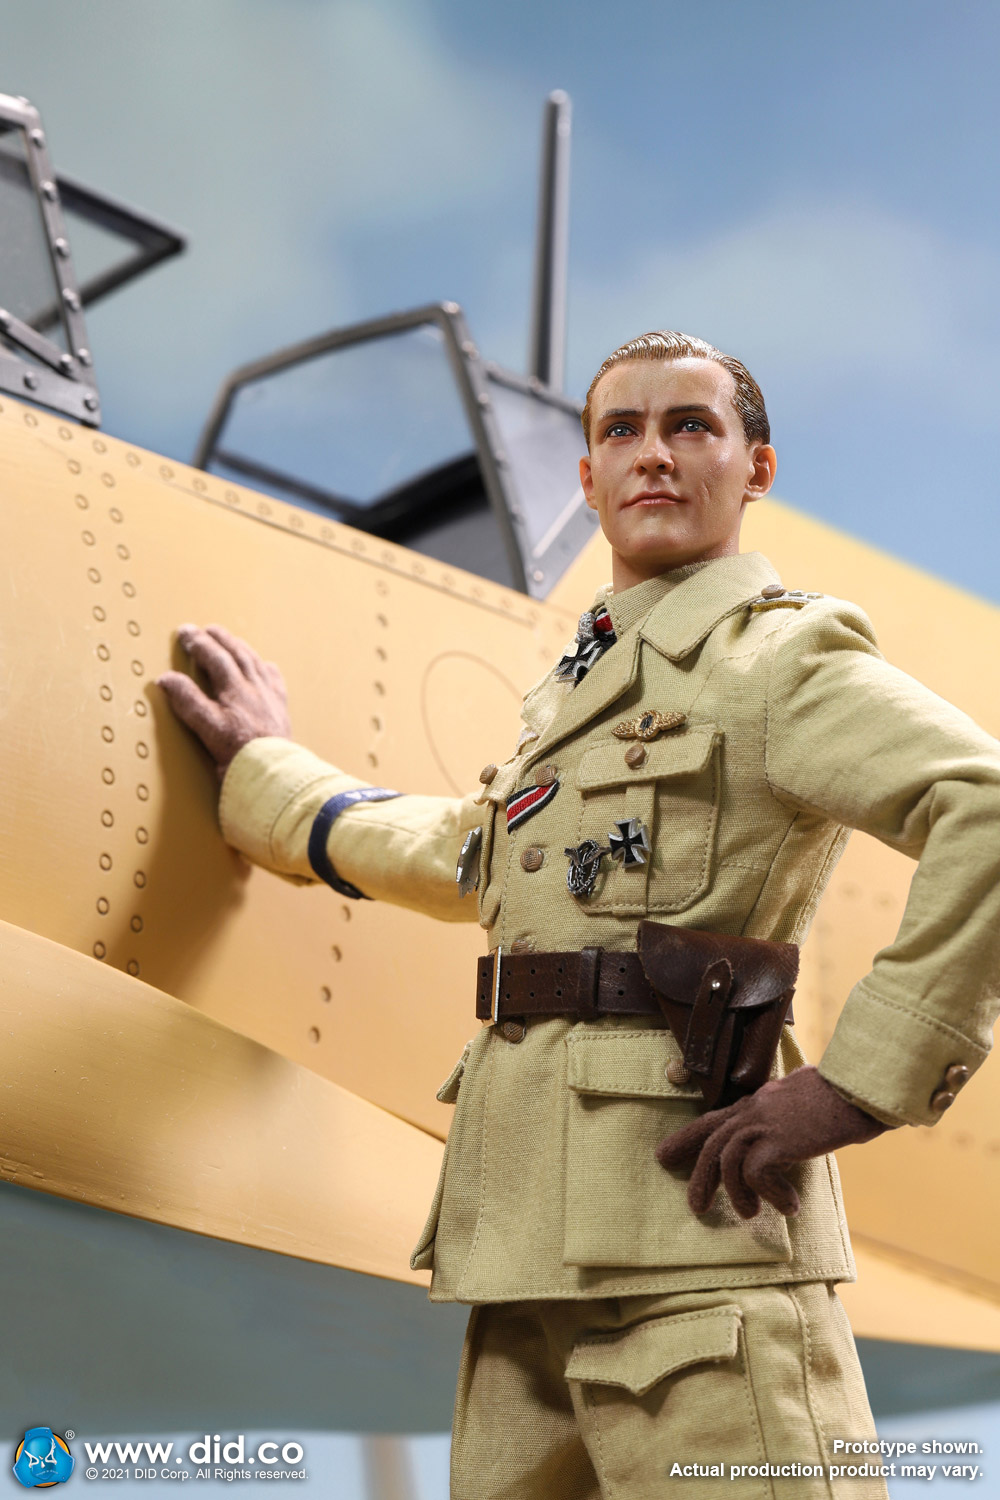 NEW PRODUCT: D80154 WWII German Luftwaffe Flying Ace “Star Of Africa” – Hans-Joachim Marseille & E60060  Diorama Of “Star Of Africa” 15299